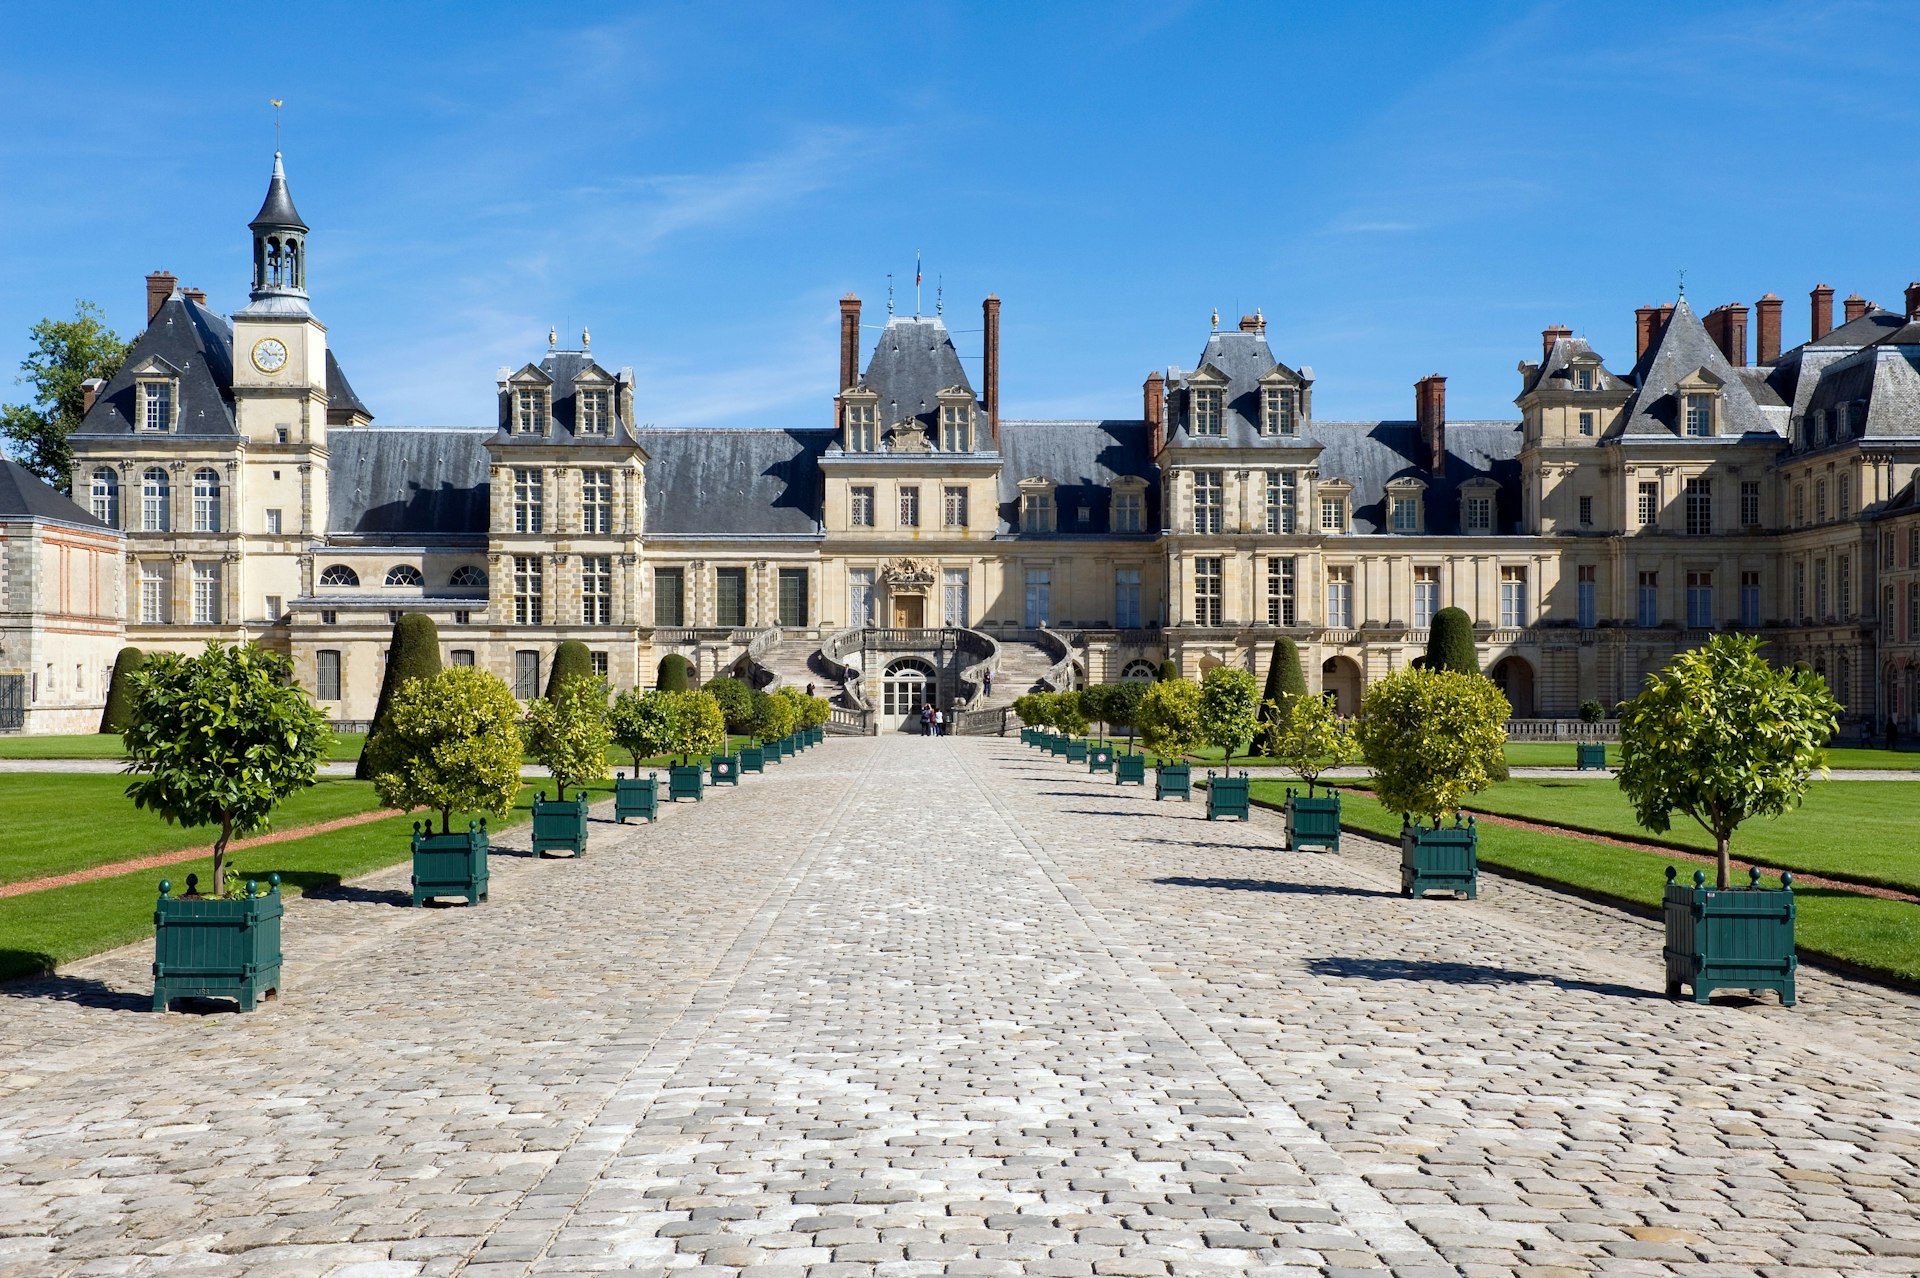 Planter-lined cobblestone pathway leading to Chateau Fontainebleau in France